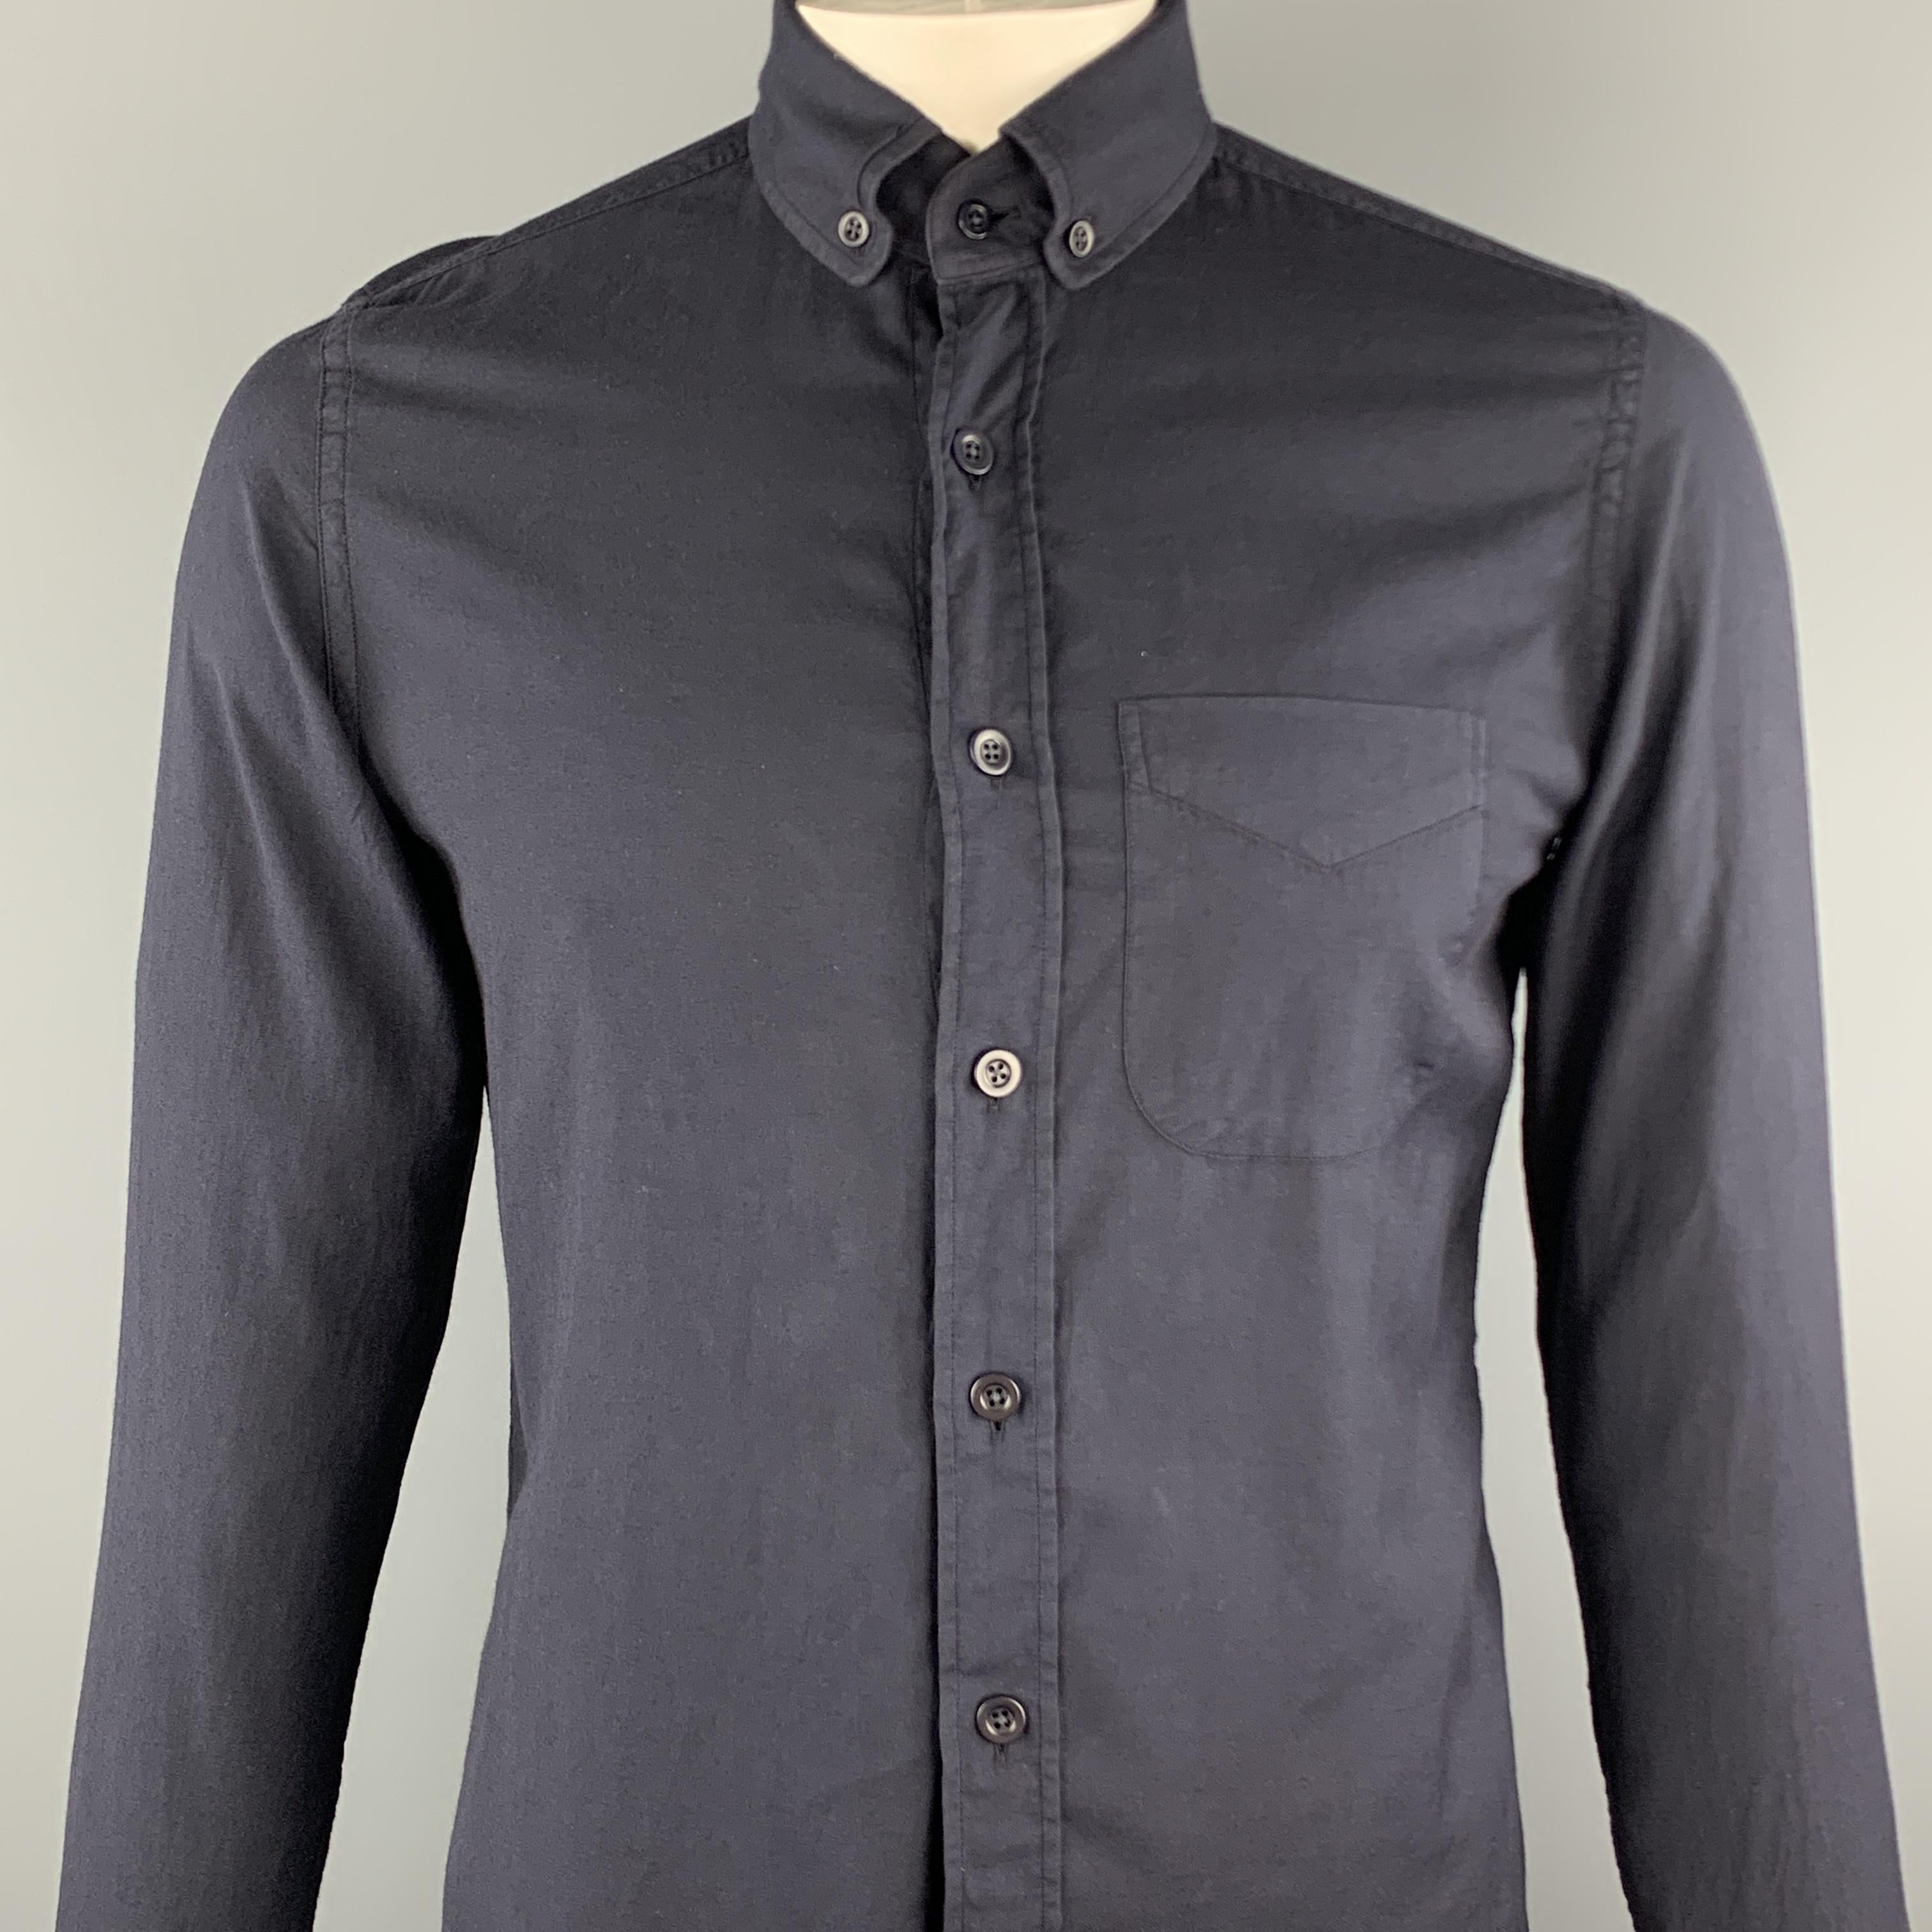 TOM FORD long sleeve shirt comes in a black cotton featuring a button down style and a front patch pocket. 

Excellent Pre-Owned Condition.
Marked: 10 / 15.5

Measurements:

Shoulder: 16 in.
Chest: 40 in.
Sleeve: 28 in.
Length: 31 in.